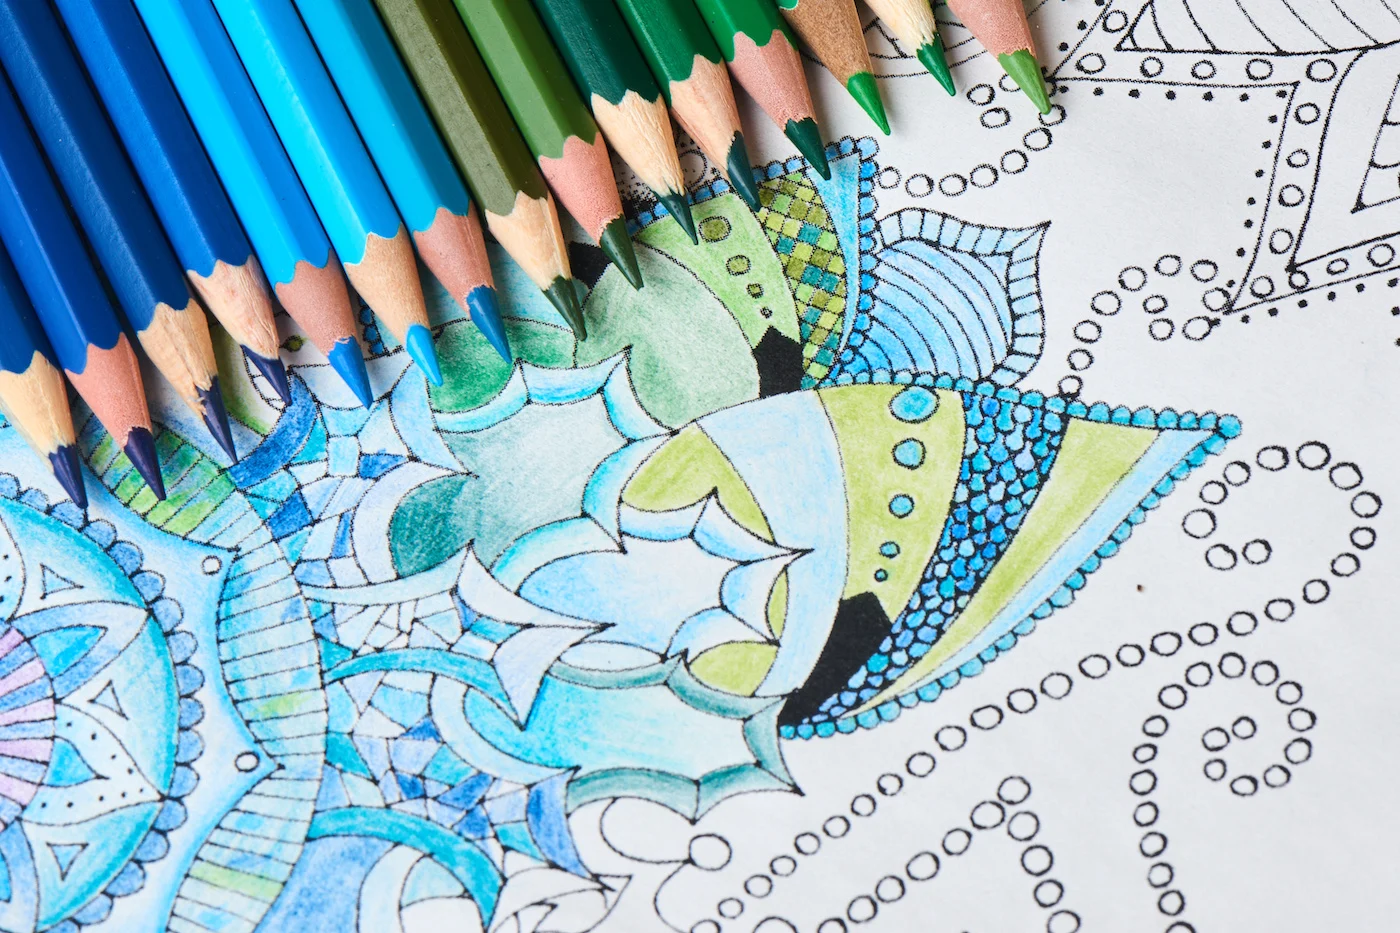 https://diycandy.b-cdn.net/wp-content/uploads/2021/01/Coloring-page-with-blue-colored-pencils.jpeg.webp